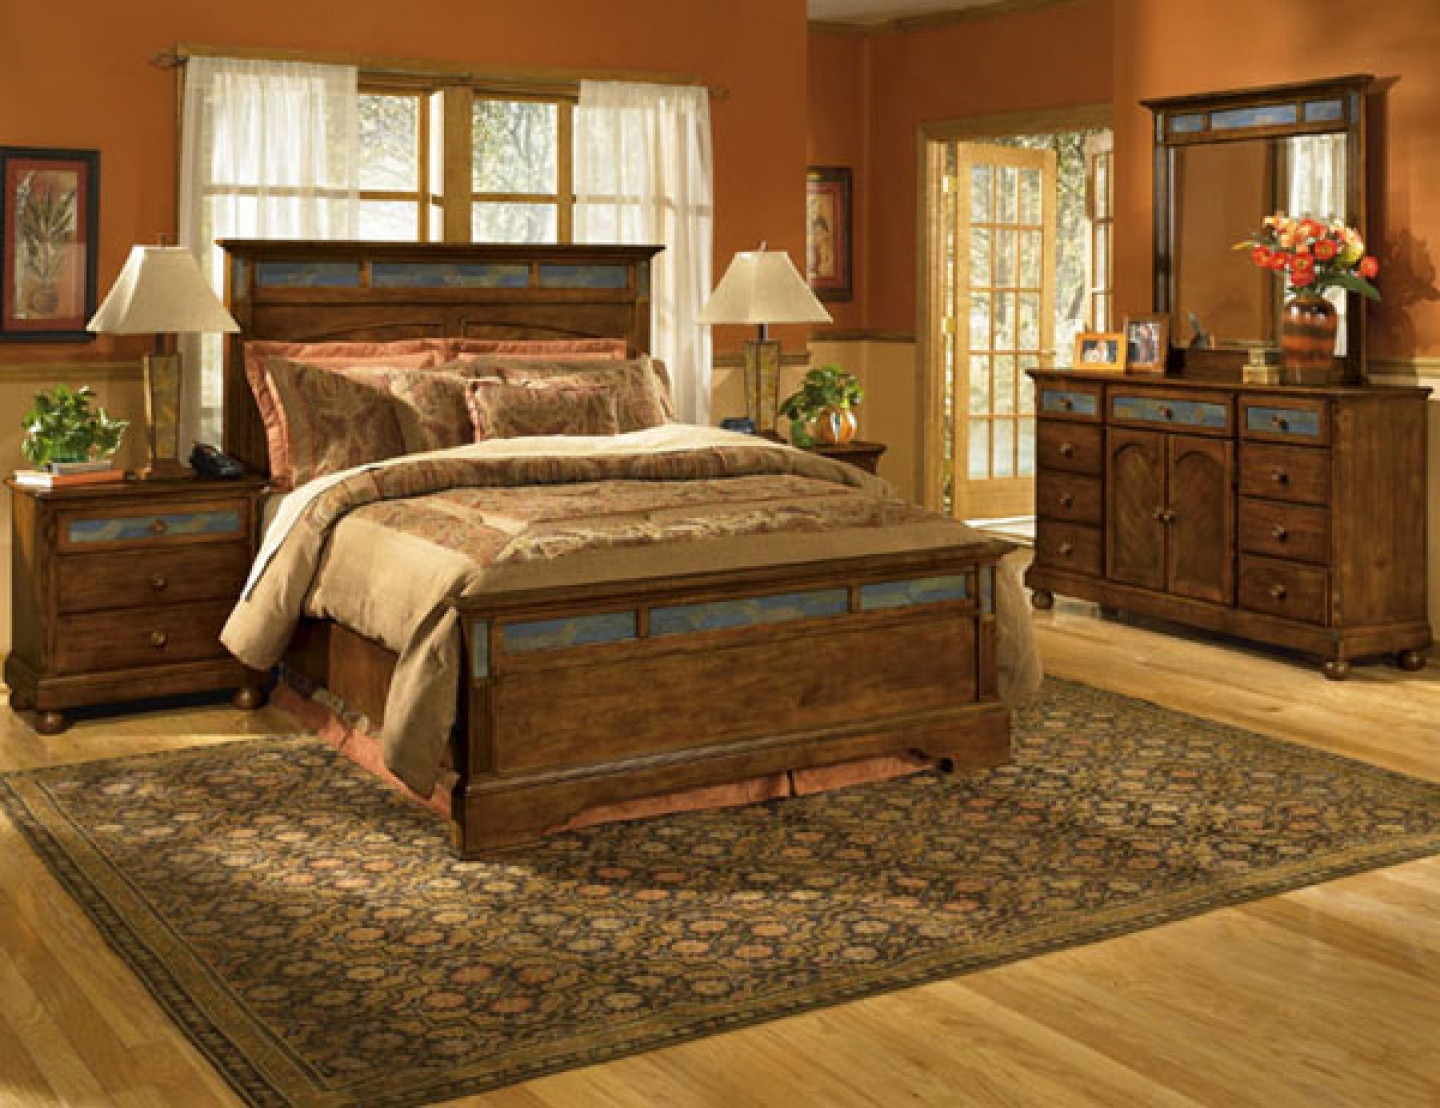 Rustic Bedroom Paint Colors
 35 Rustic Bedroom Design For Your Home – The WoW Style